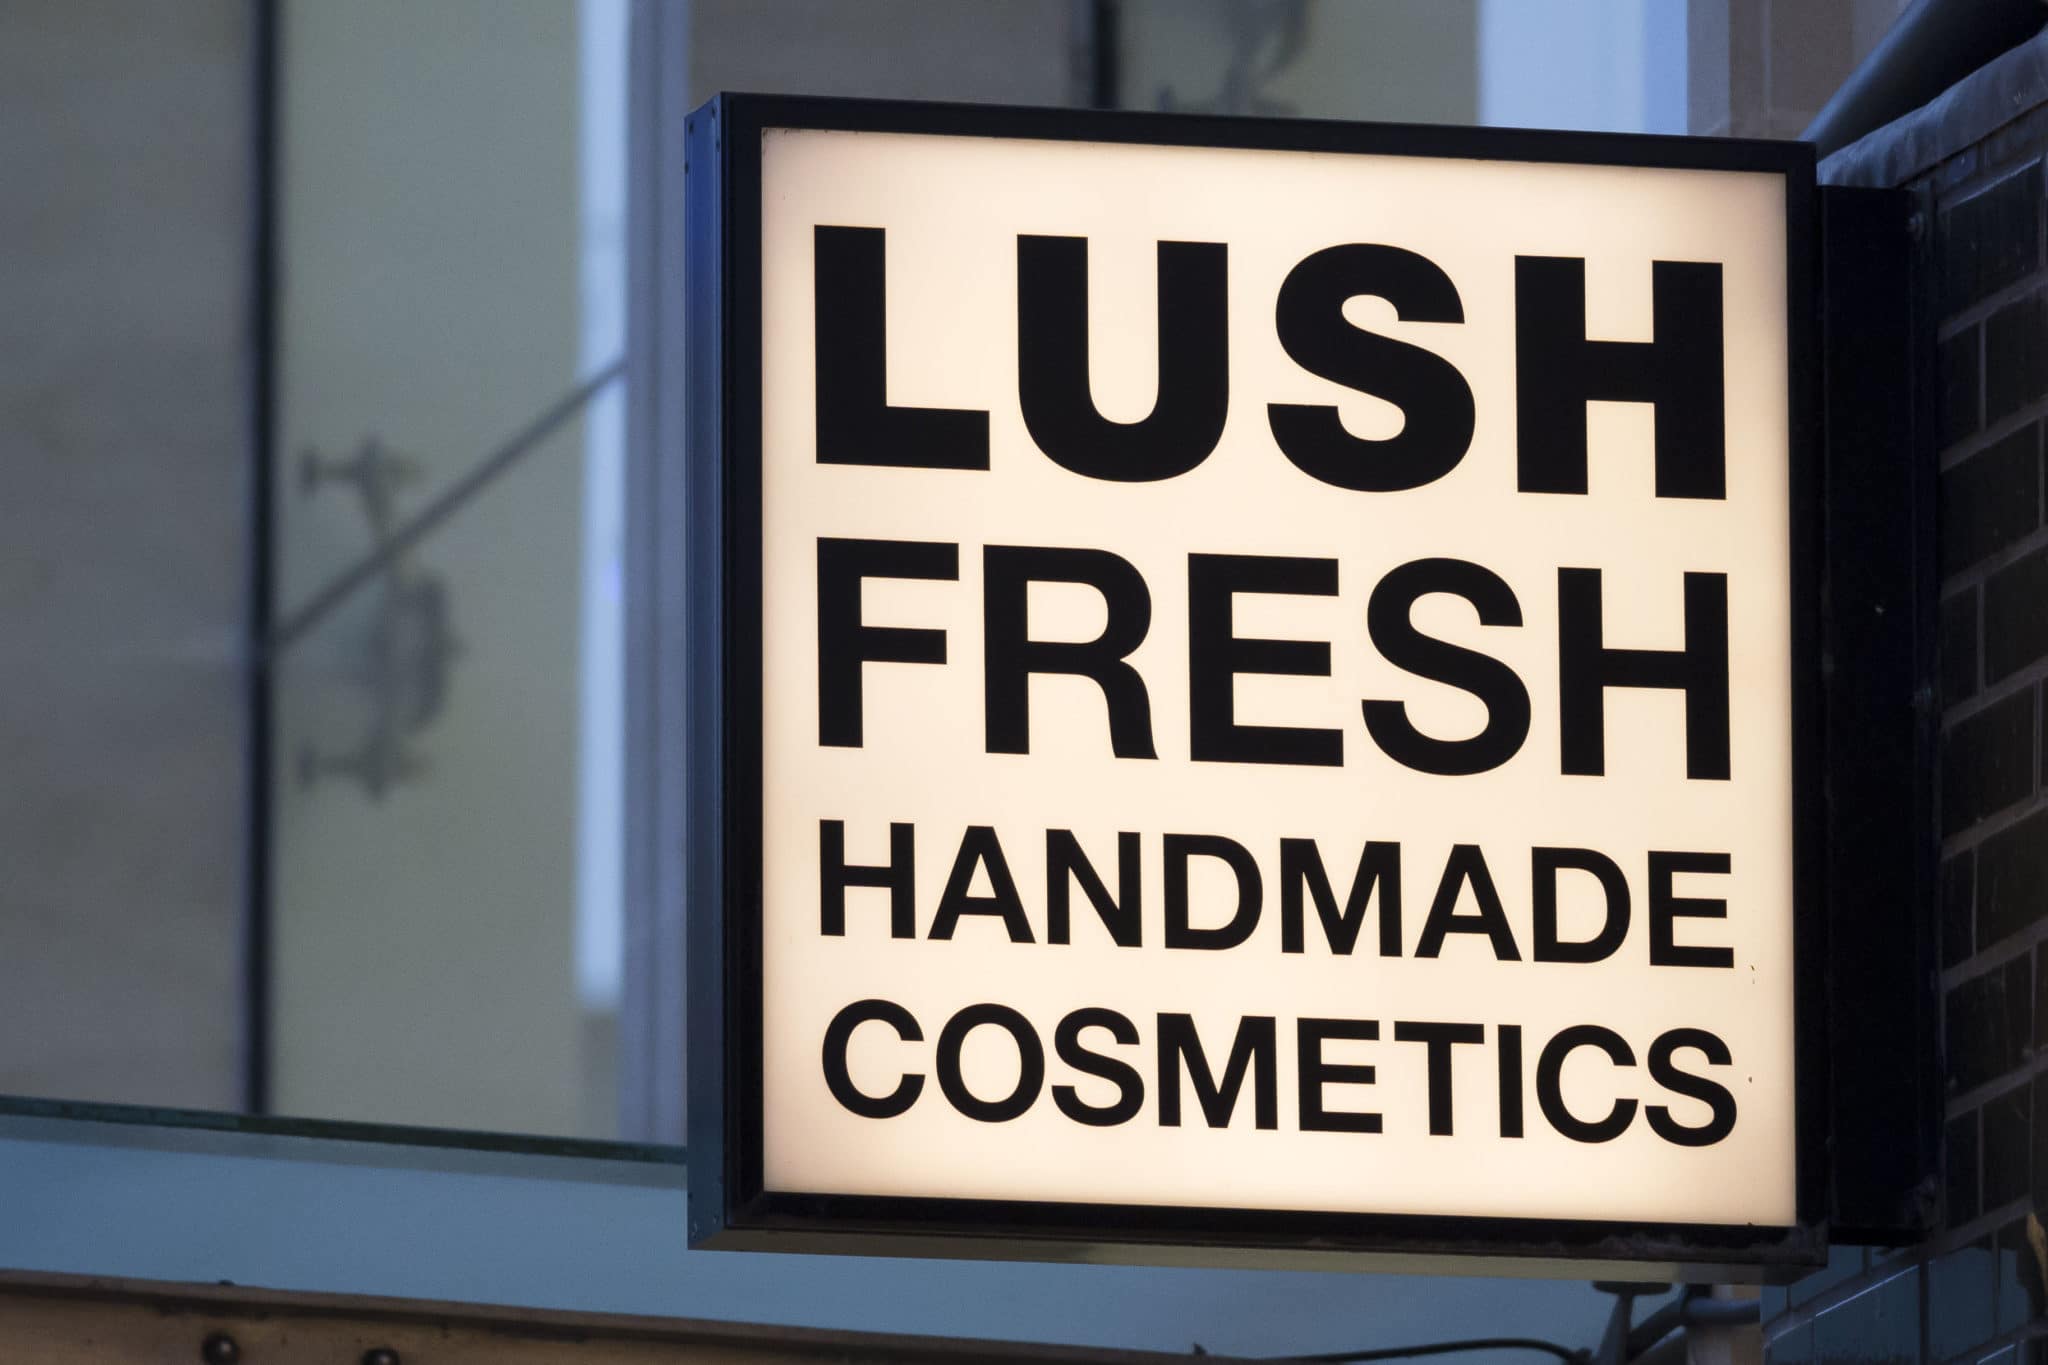 Lush has now issued an updated statement which says it is "sorry" that it funded campaigning against trans rights